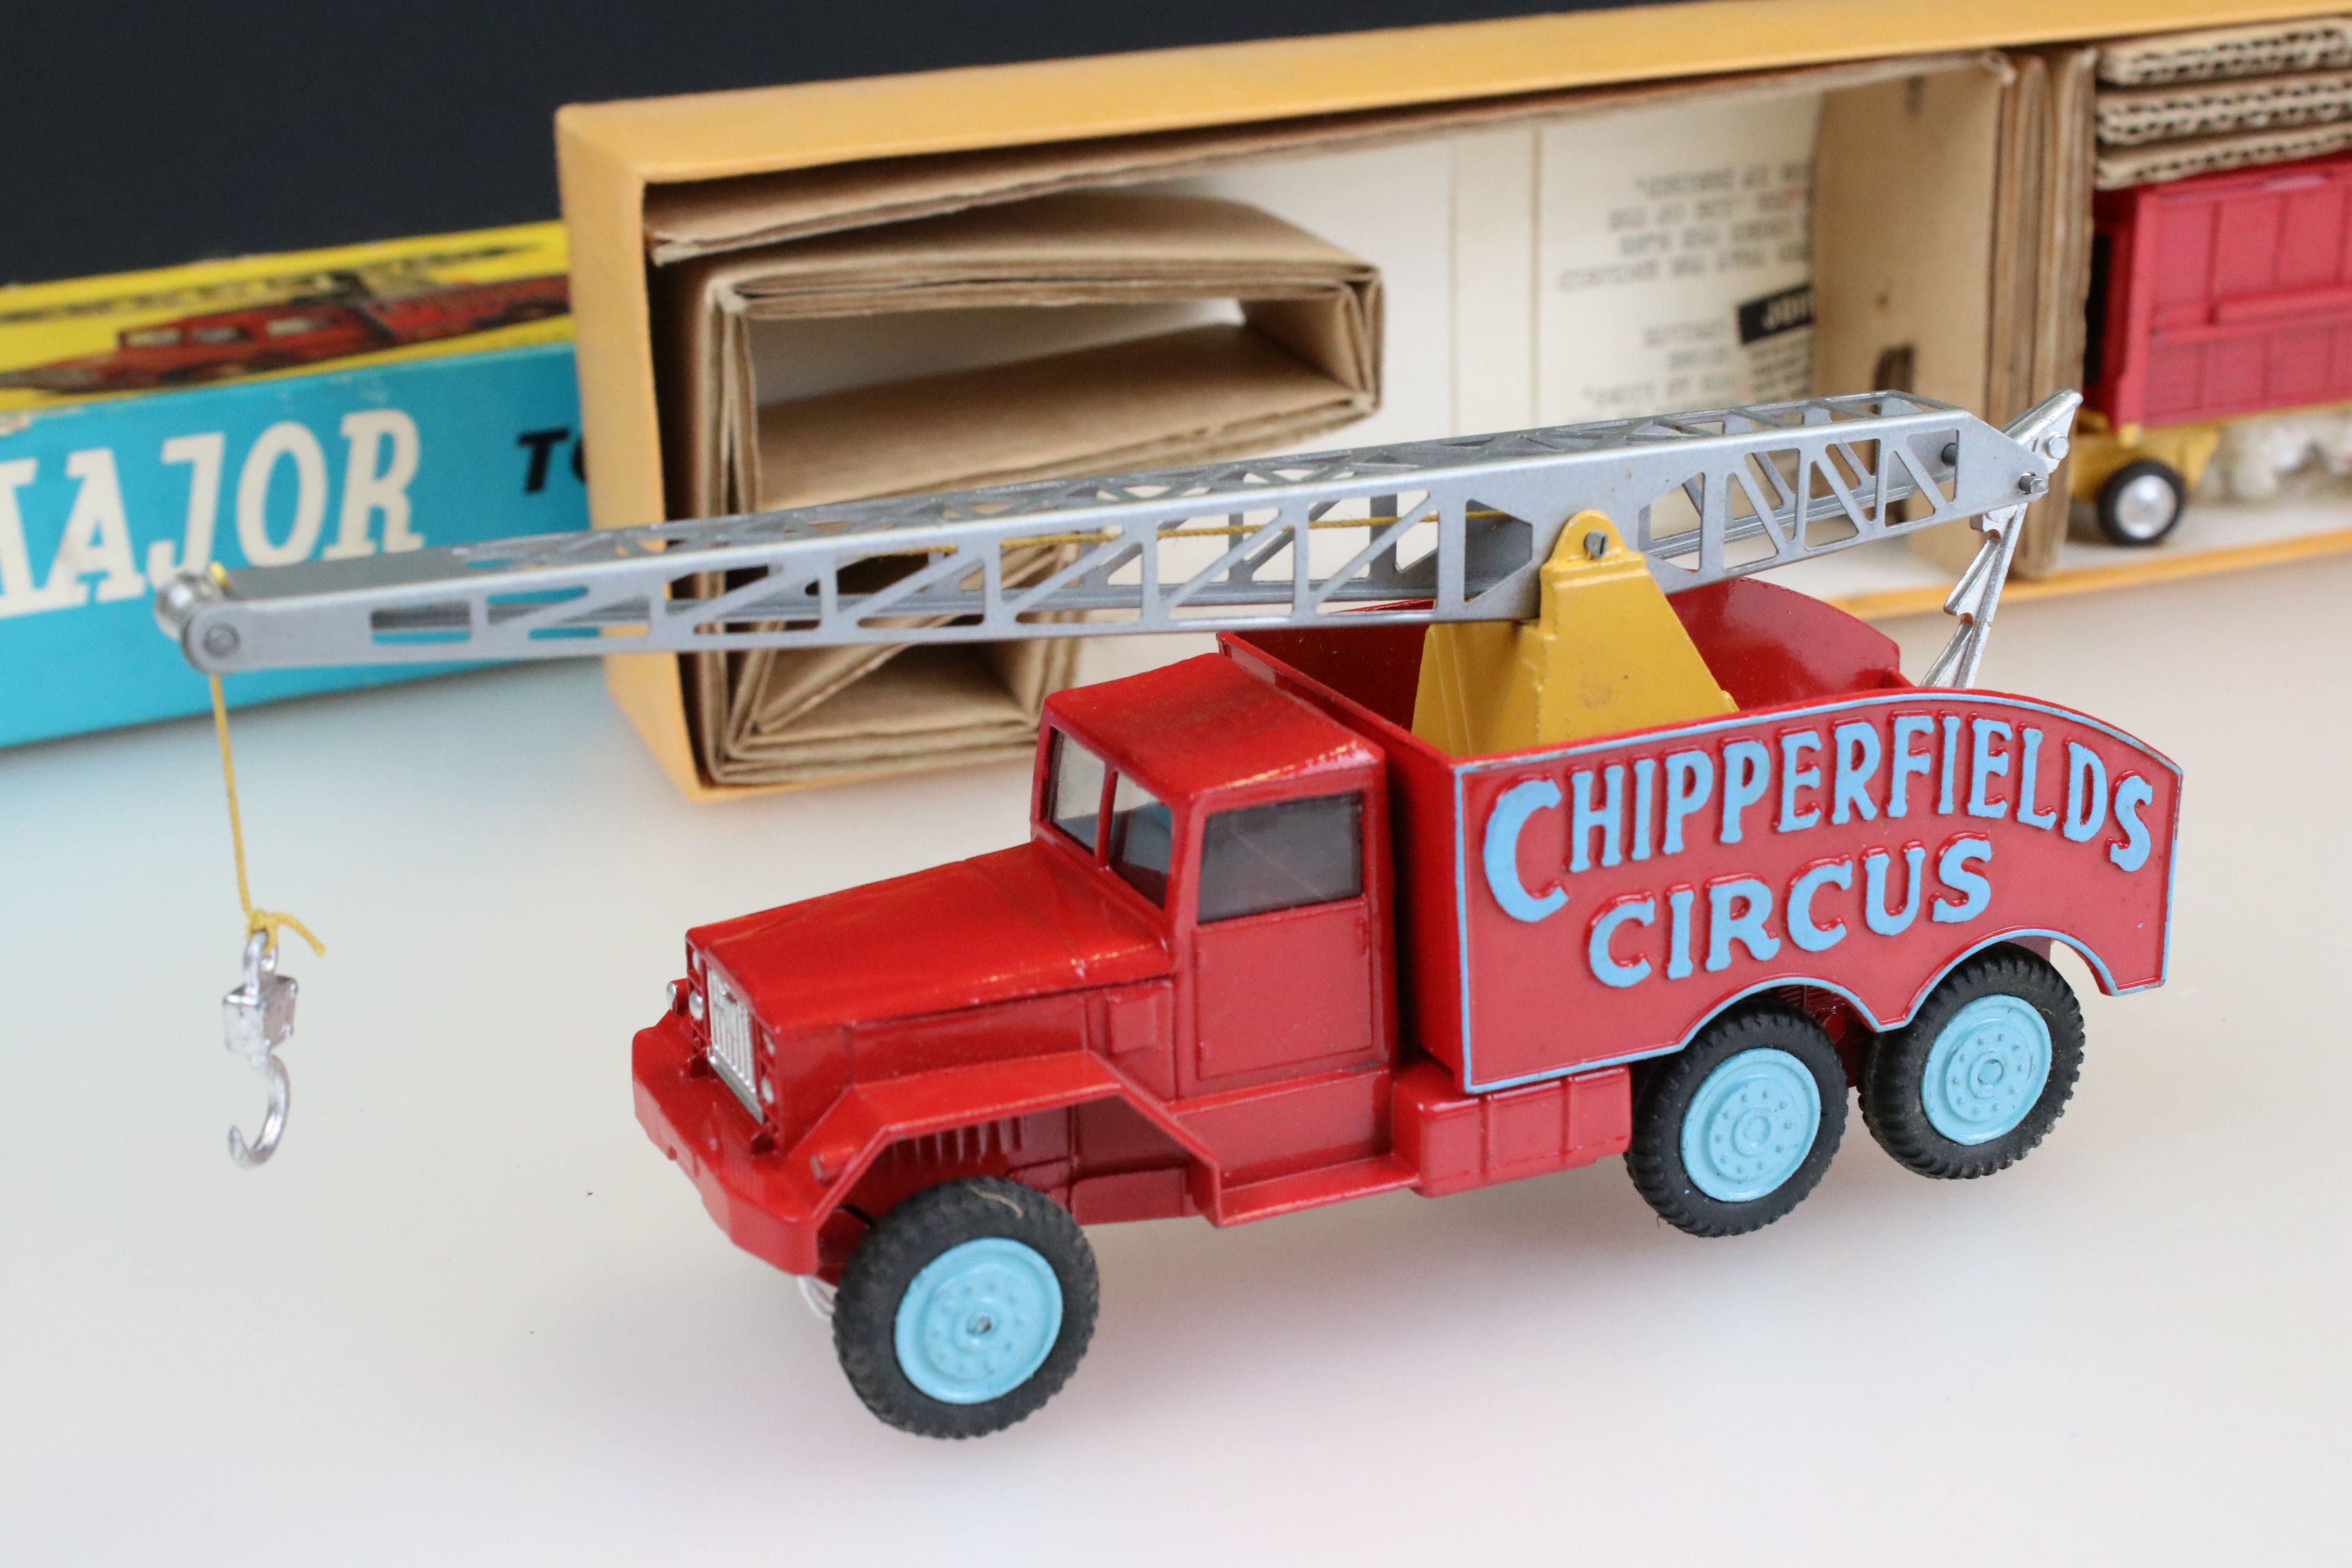 Boxed Corgi Major Gift Set No. 12 Chipperfields Circus Crane Truck and Cage in excellent condition - Image 2 of 13